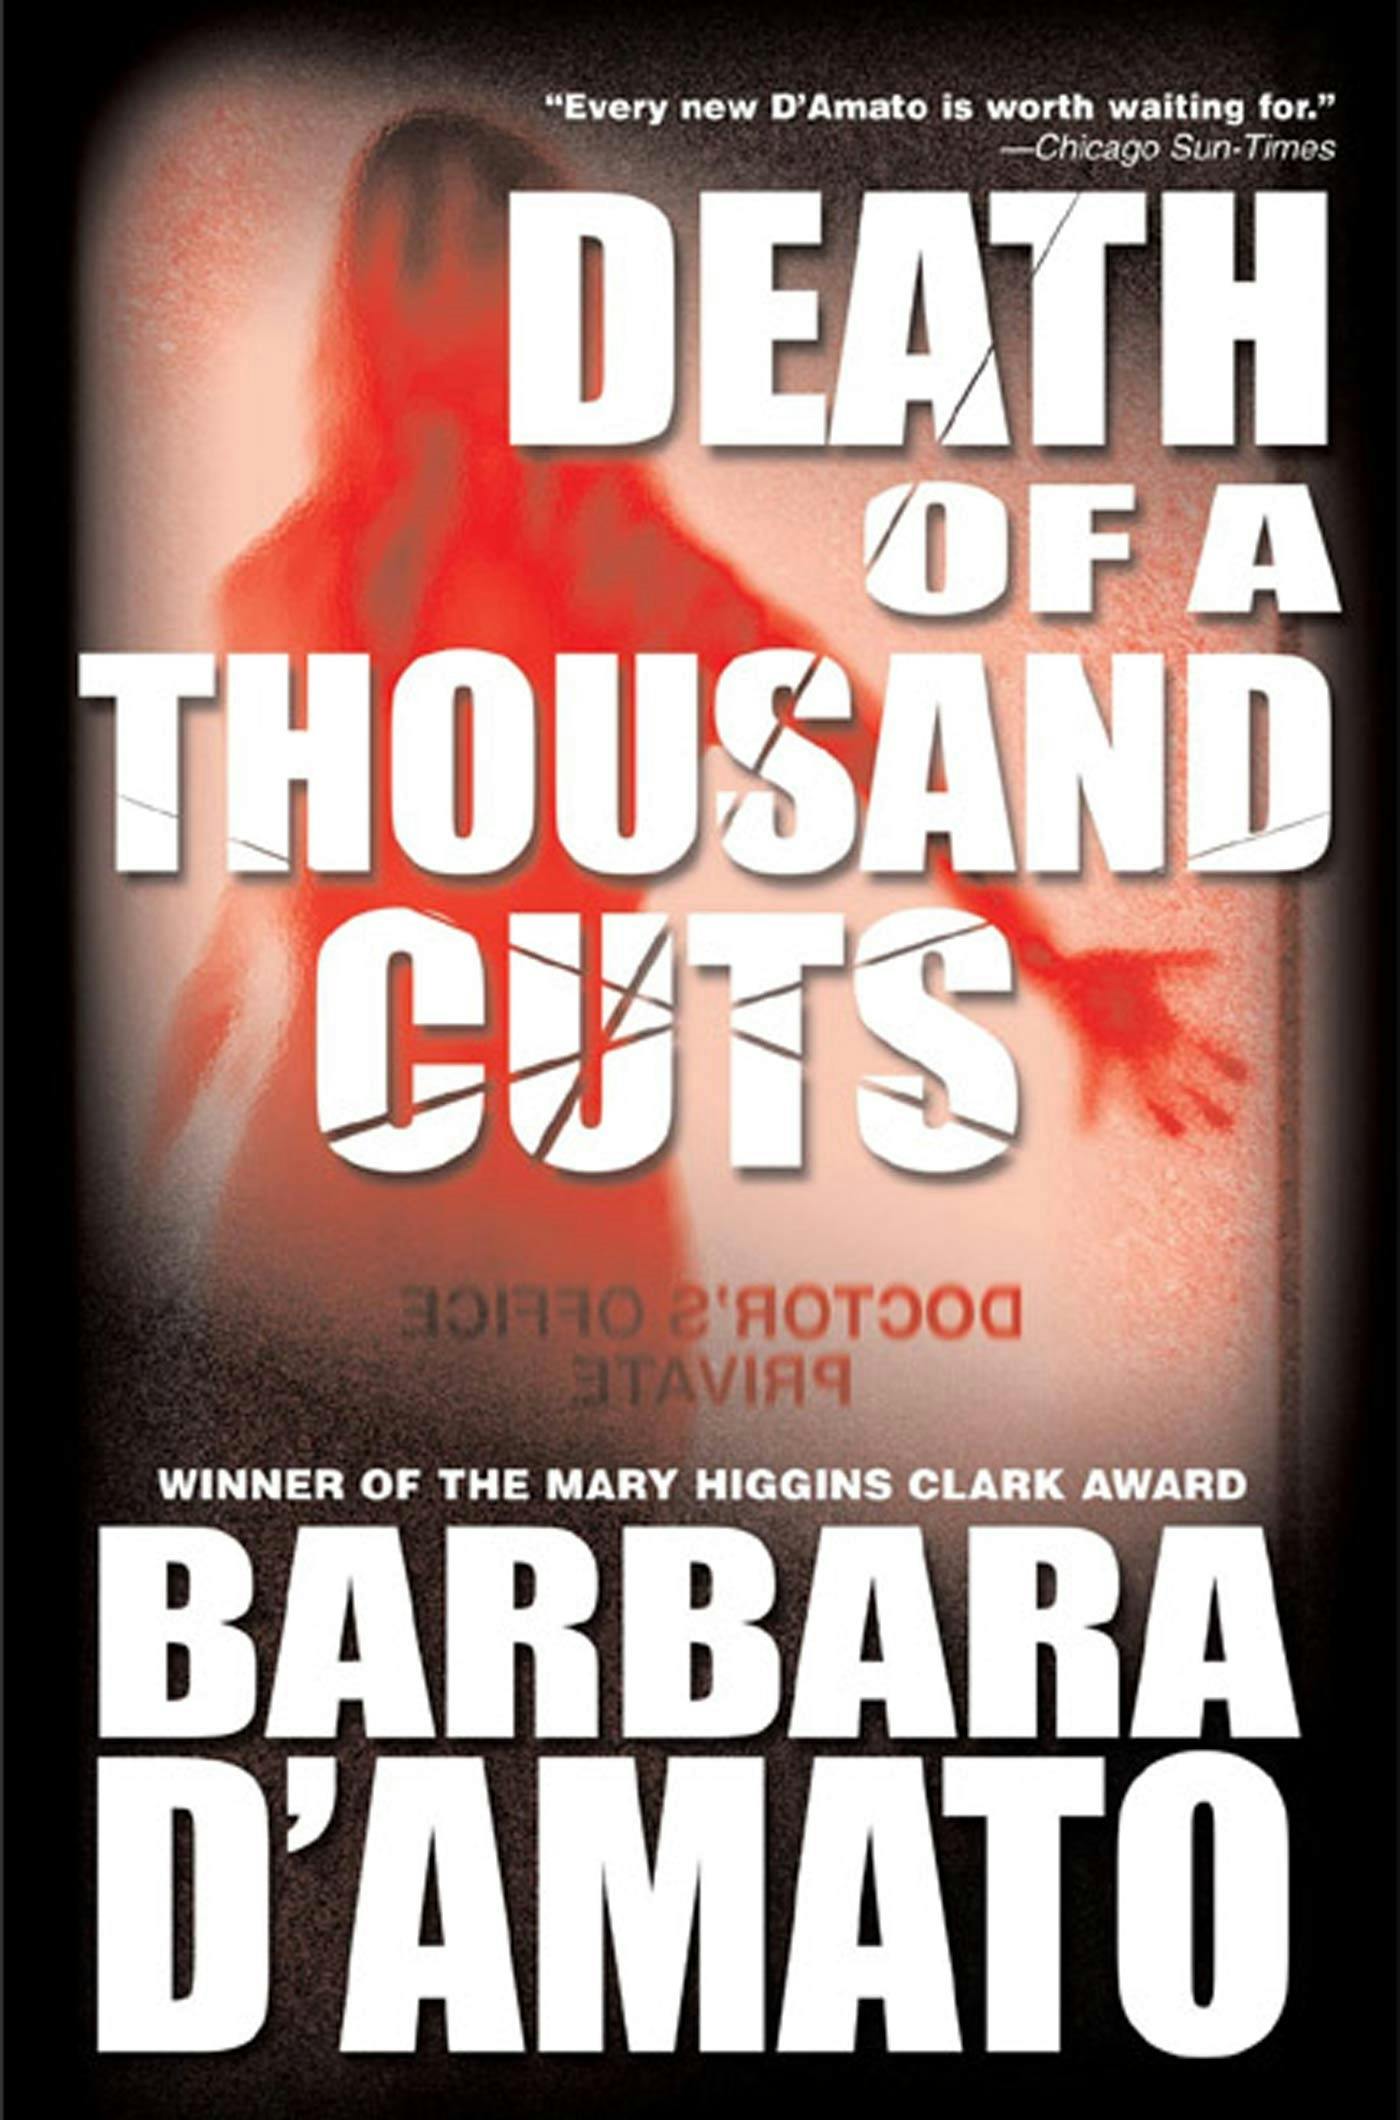 Cover for the book titled as: Death of a Thousand Cuts